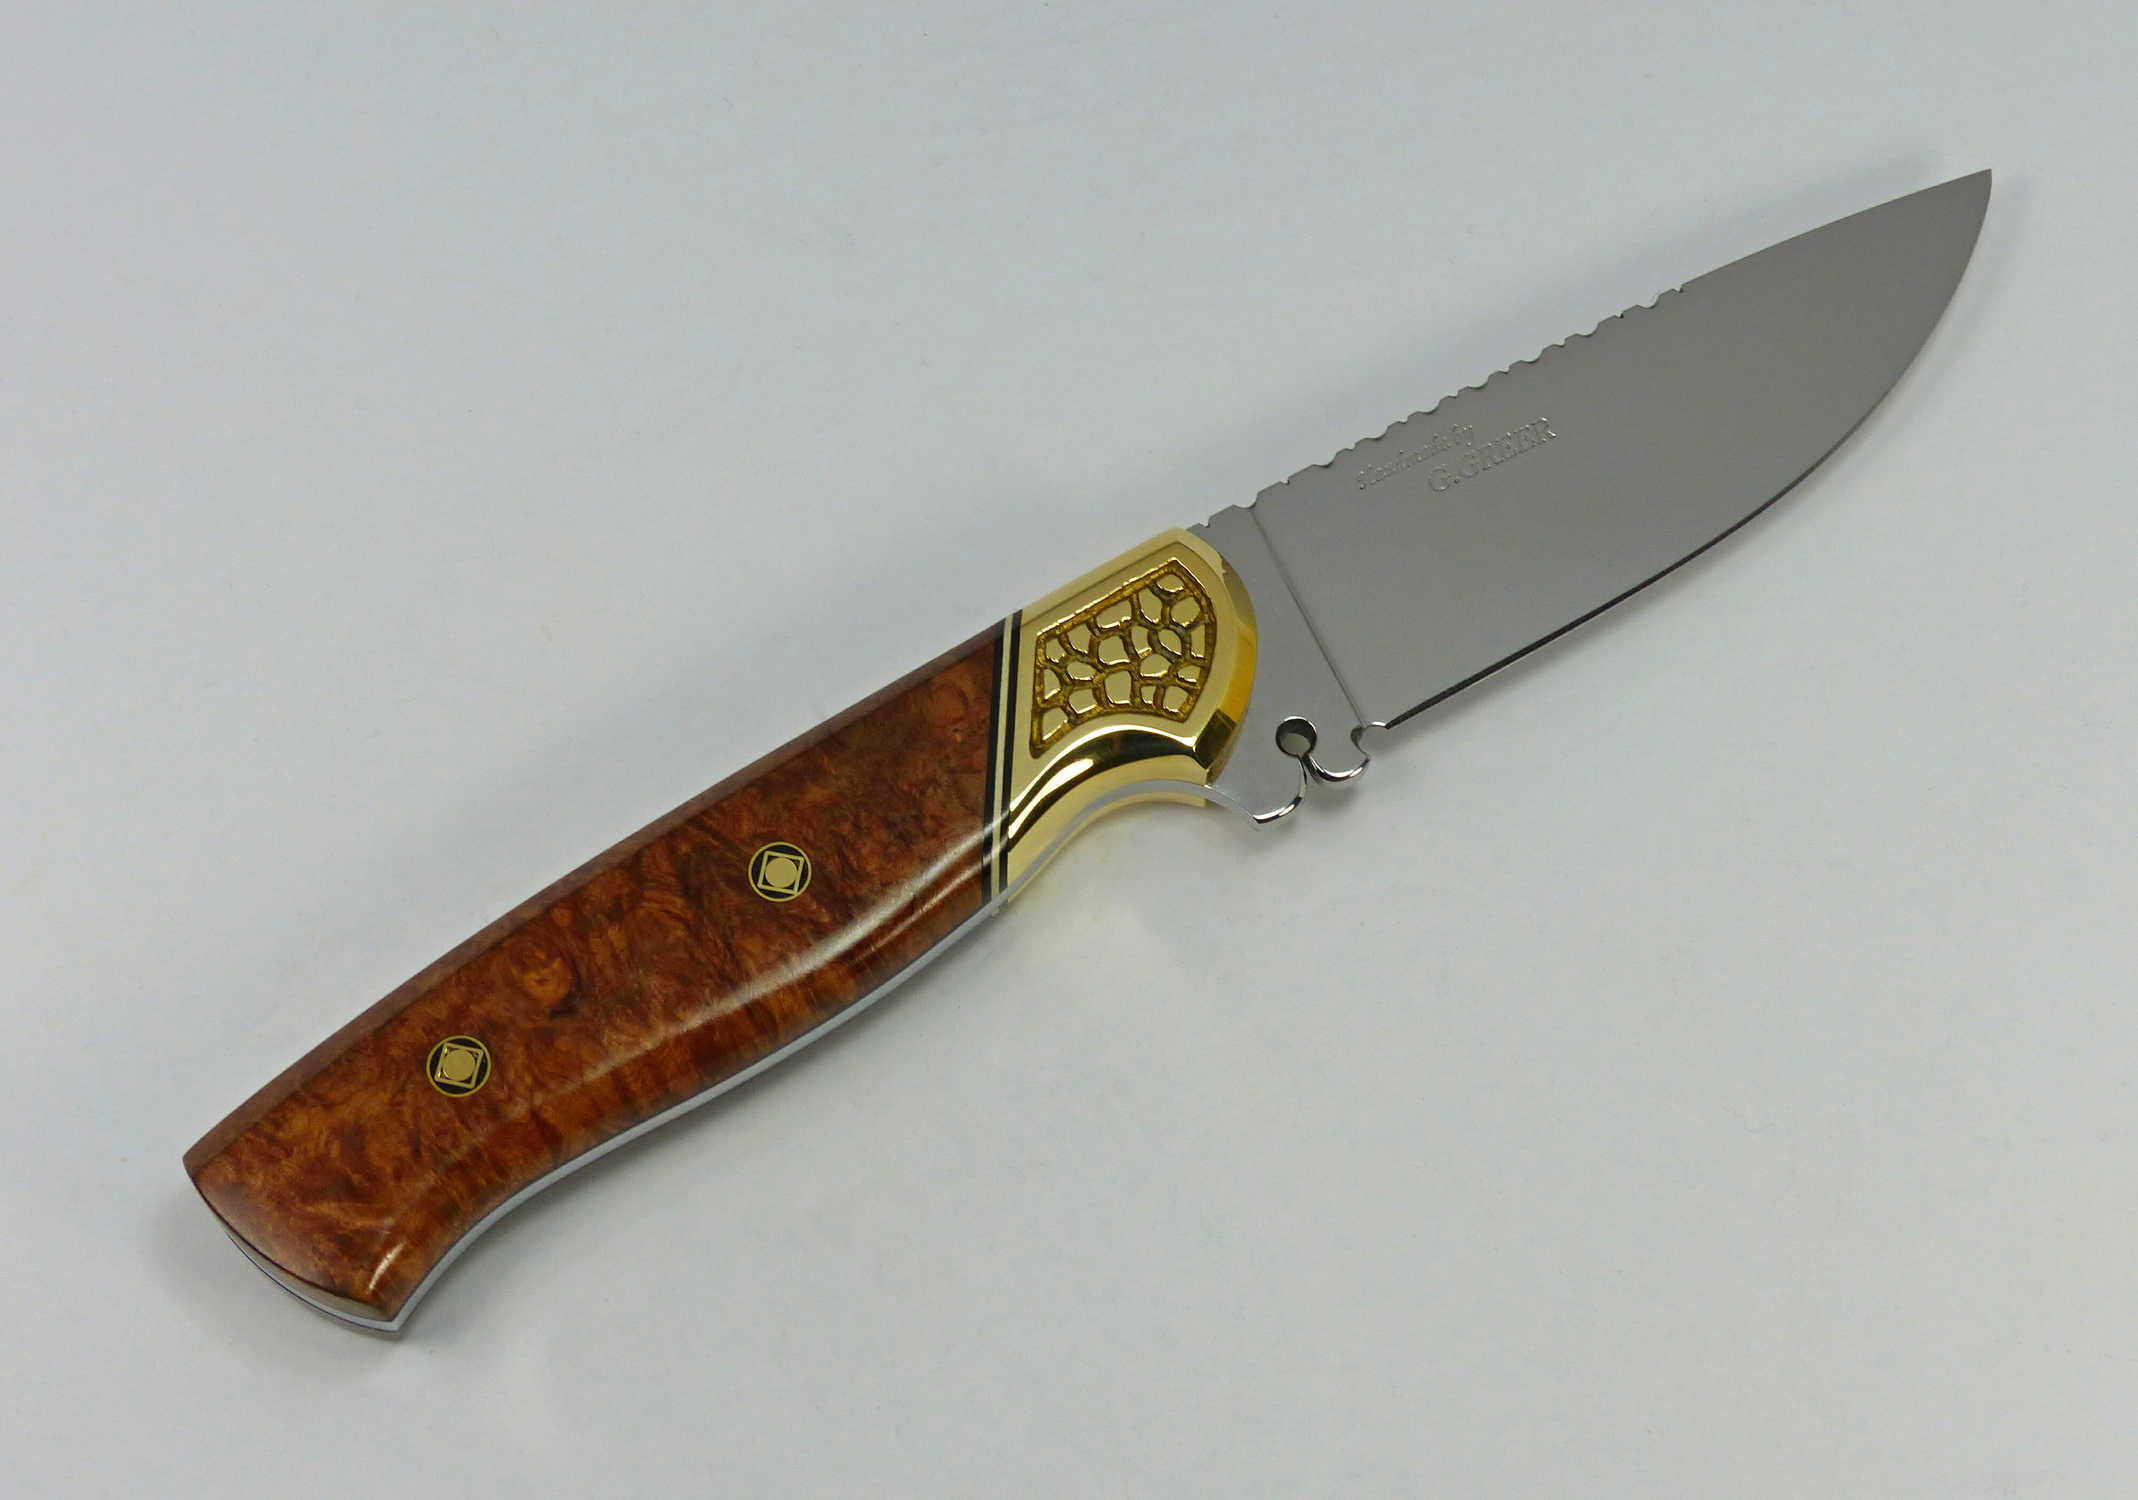 Knife with lustrous brown wood handle topped with engraved brass section fitted to a blade with ricasso